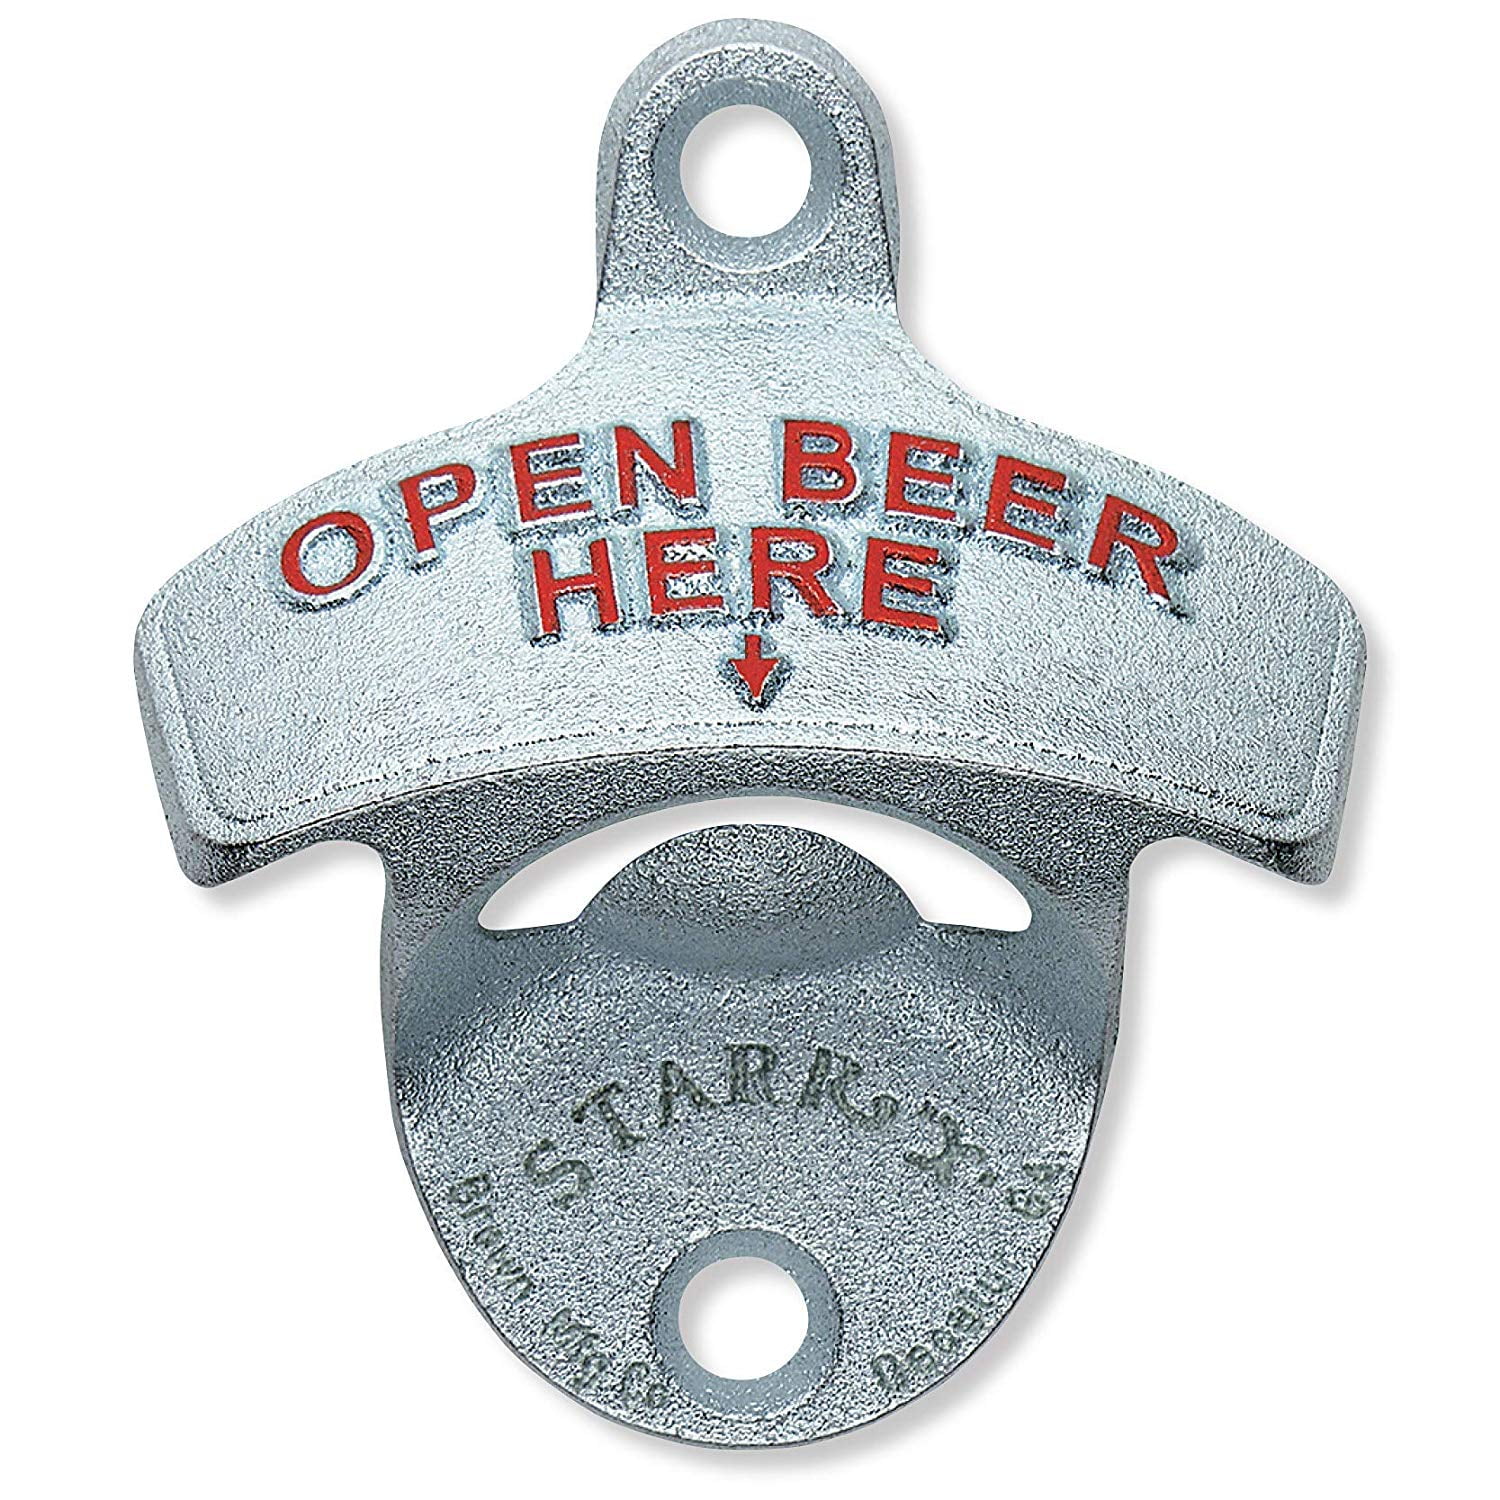 CRAFT BREWED IN THE USA Beer Starr X Bottle Opener NEW 